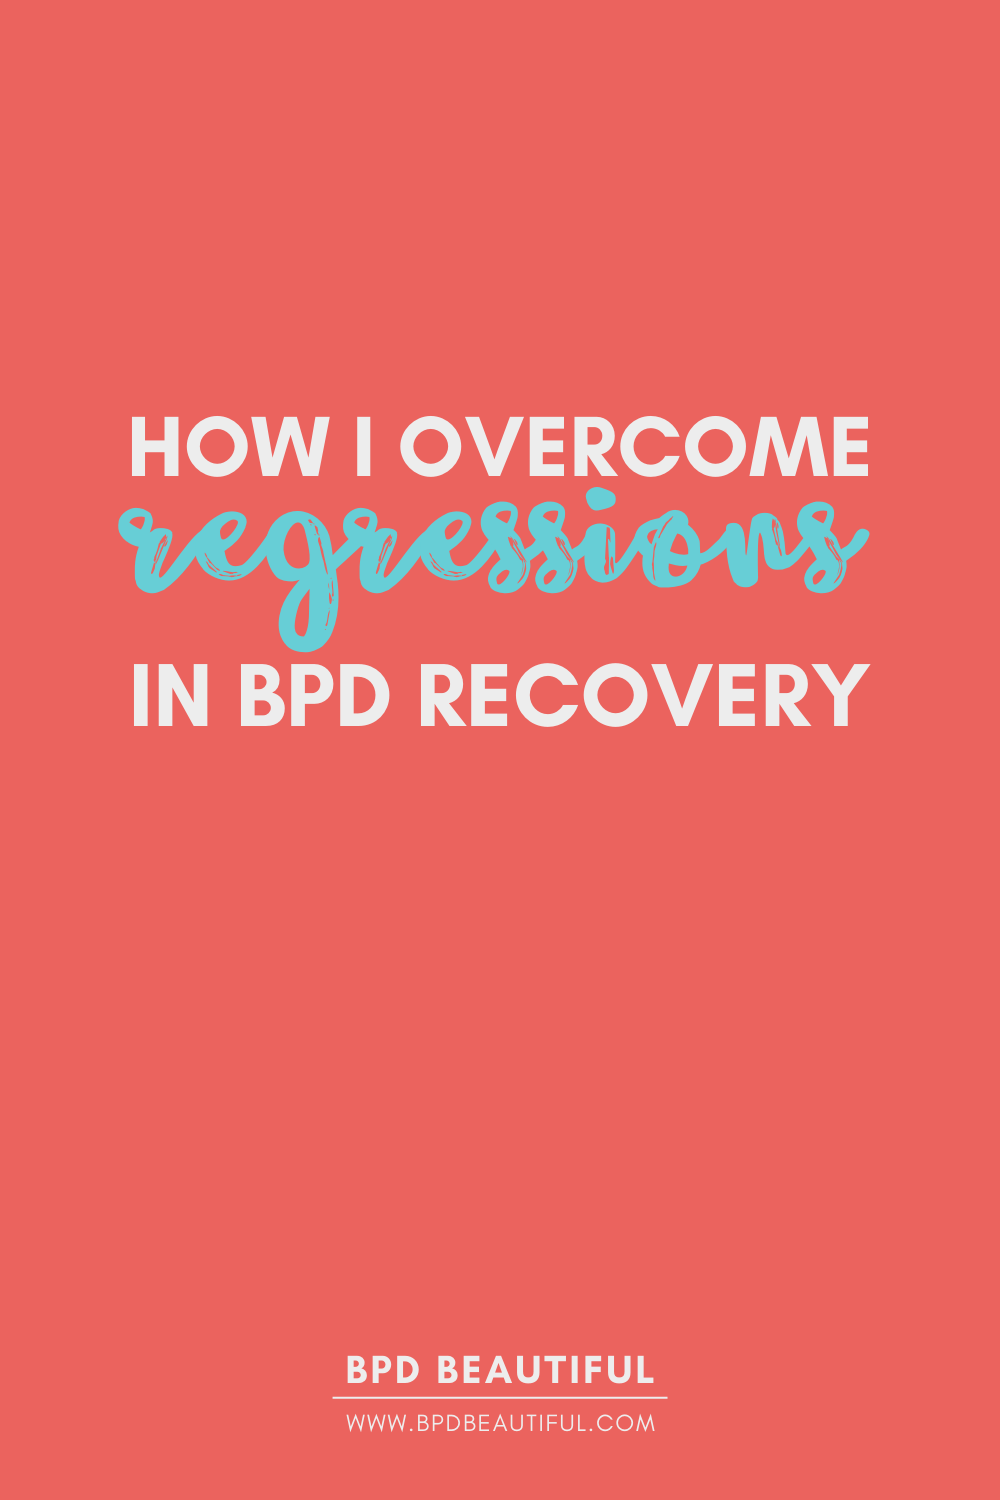 BPD Recovery: How I Overcome Regressions in Remission